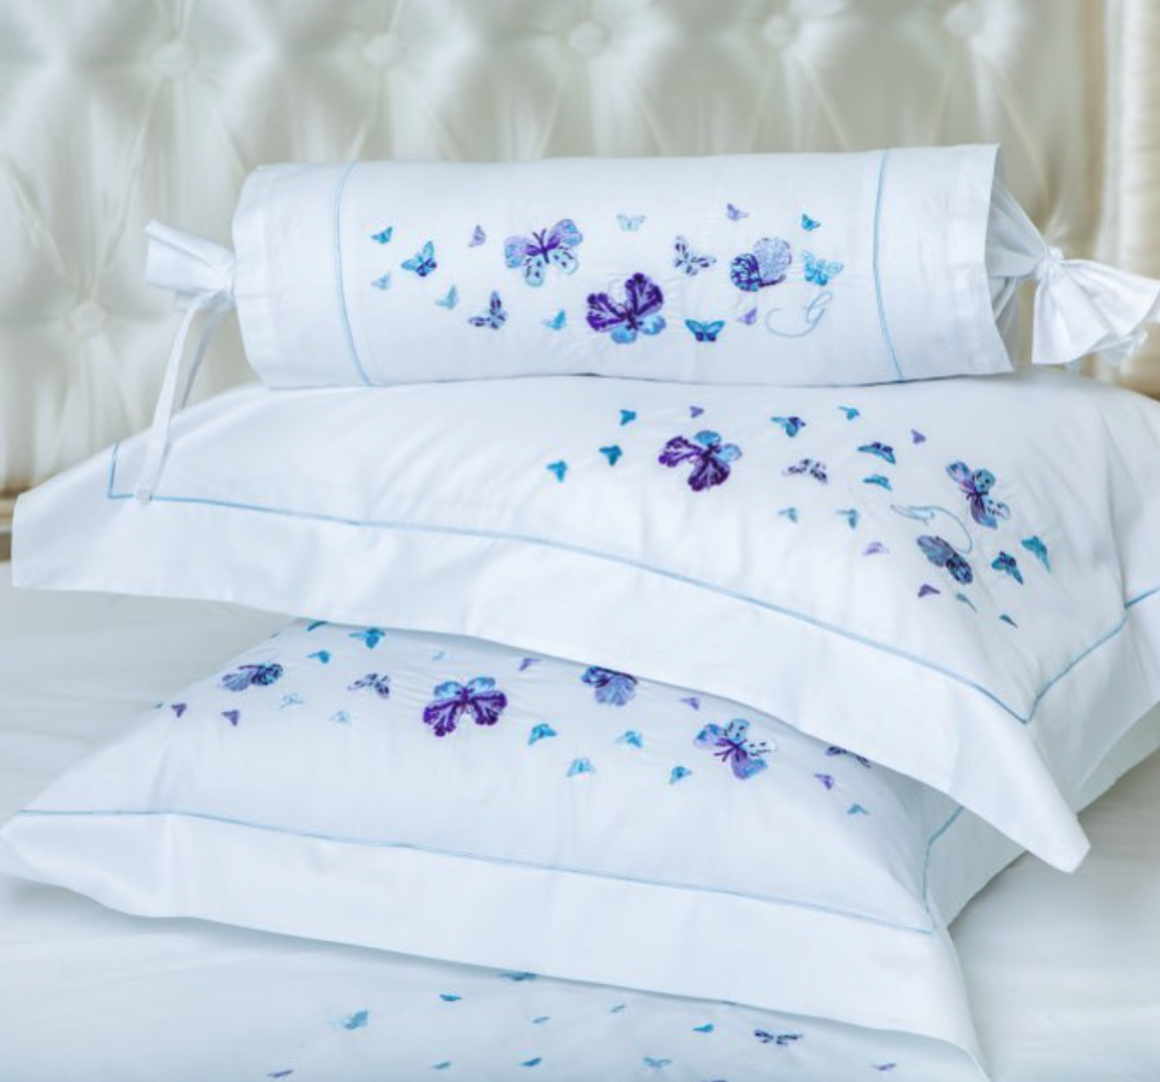 Bed linen collection design